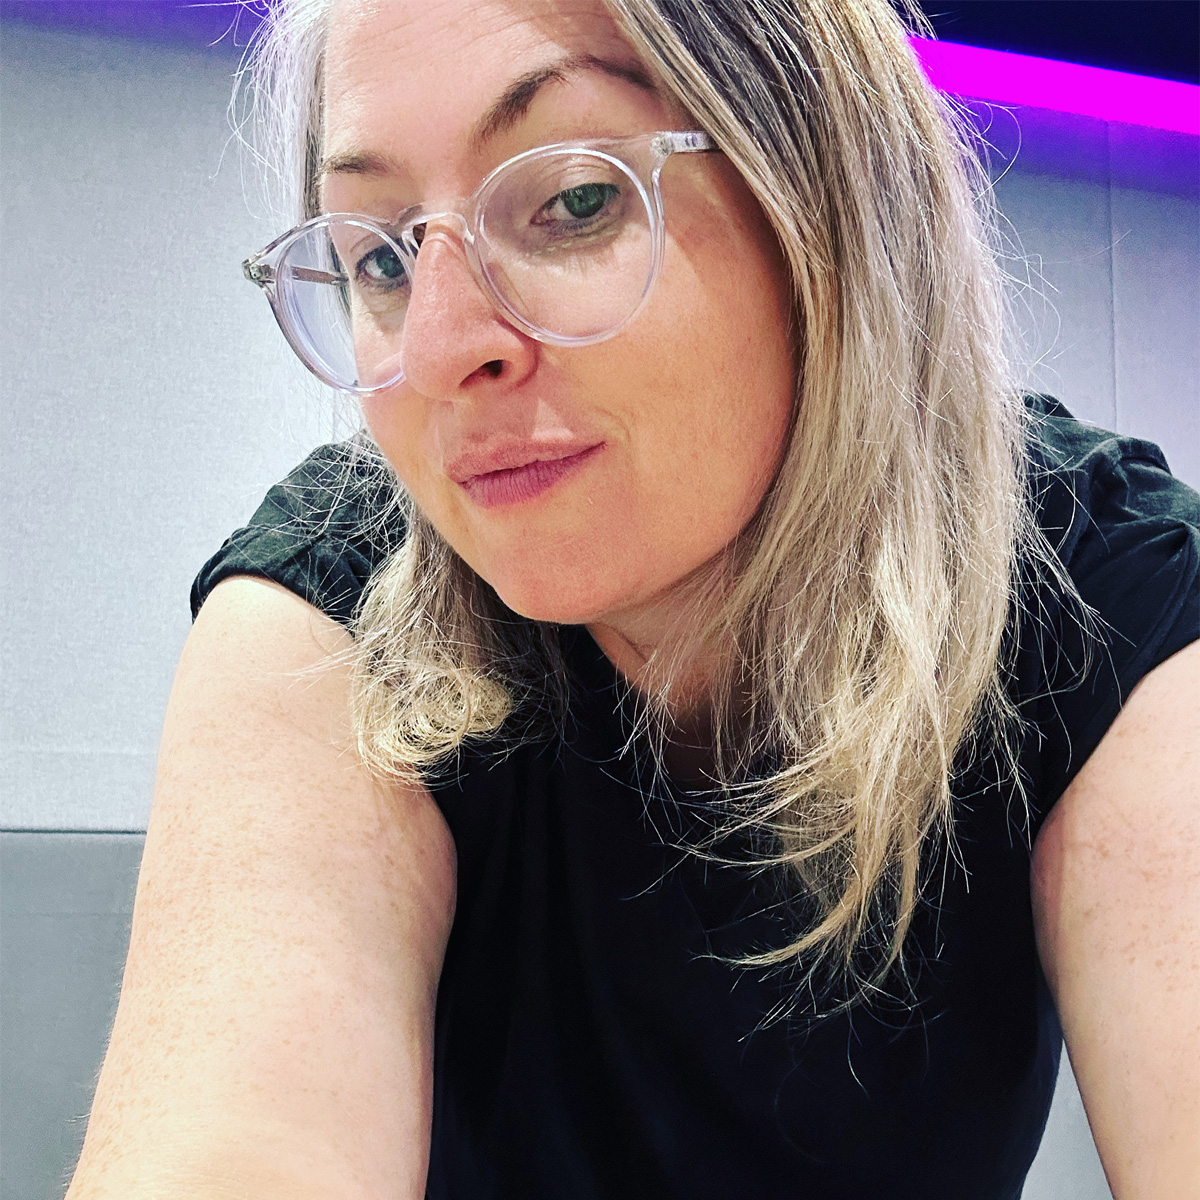 @shellzenner is back to it! with @Archieholmes10 @betawavesband @DTTVOfficial @_odaye @mrrealit @regalcheer @rennolympus @OfficialSPRLTV @trunkyjuno 👉 amazingradio.com